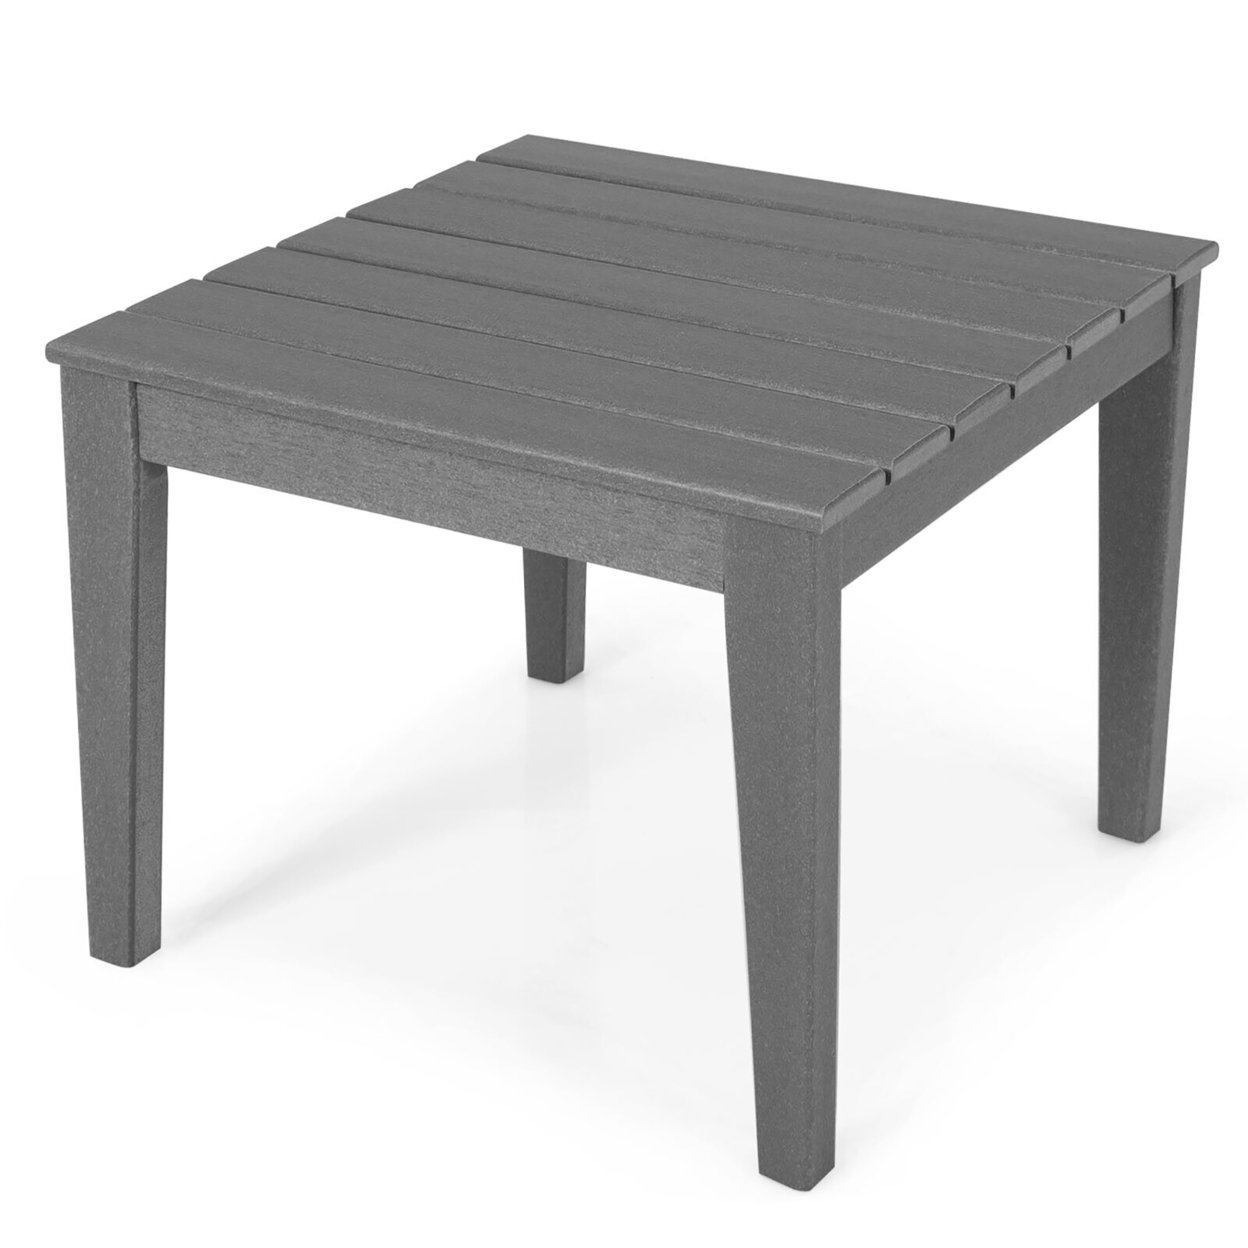 Kids Square Table Indoor Outdoor Heavy-Duty All-Weather Activity Play Table - Grey